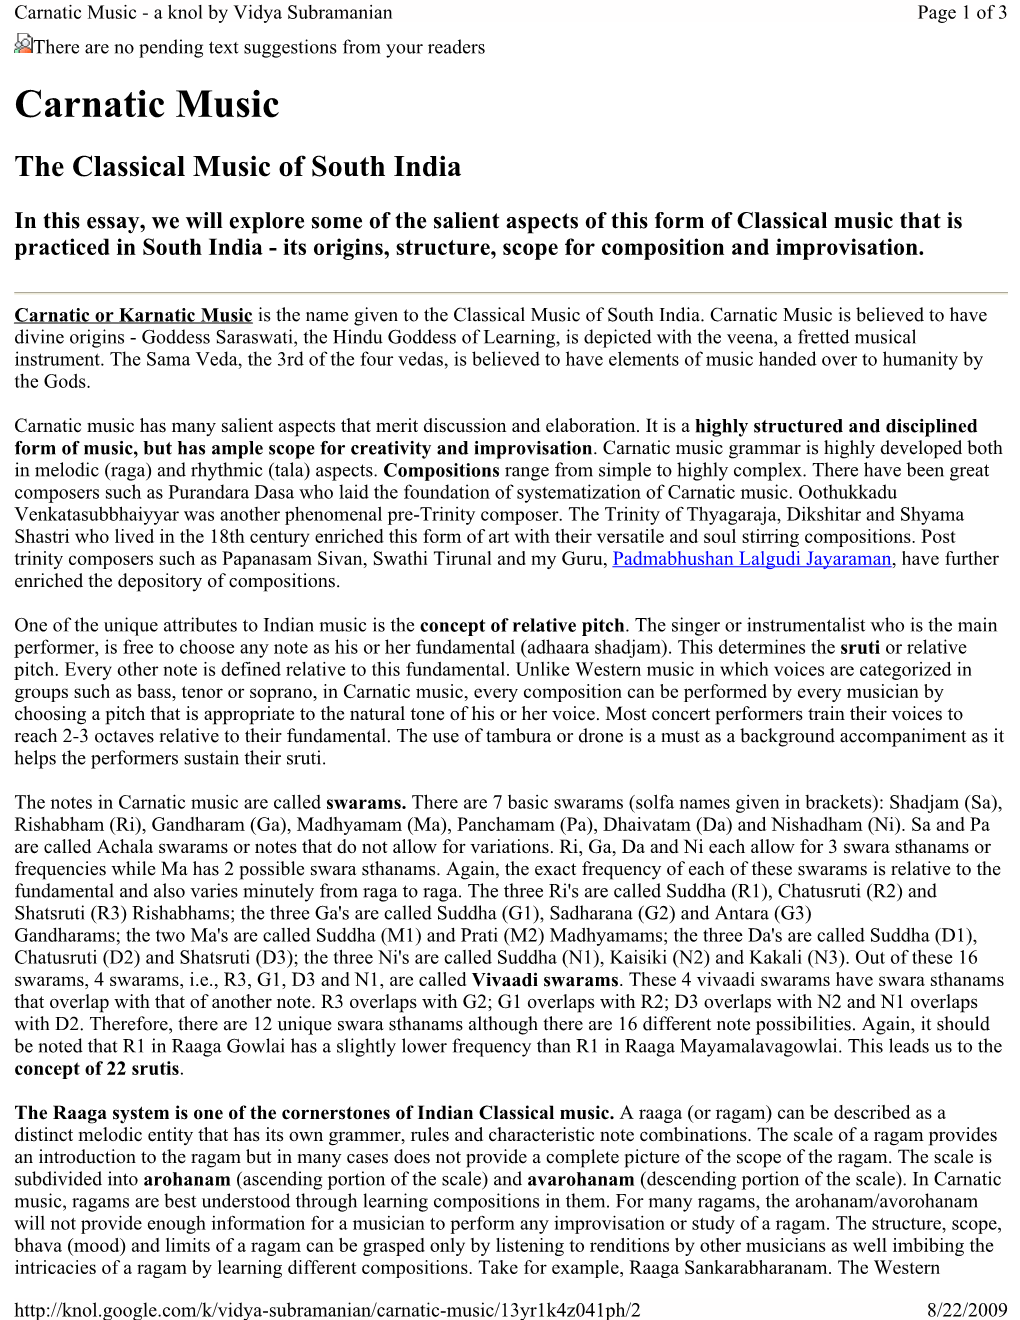 Carnatic Music - a Knol by Vidya Subramanian Page 1 of 3 There Are No Pending Text Suggestions from Your Readers Carnatic Music the Classical Music of South India